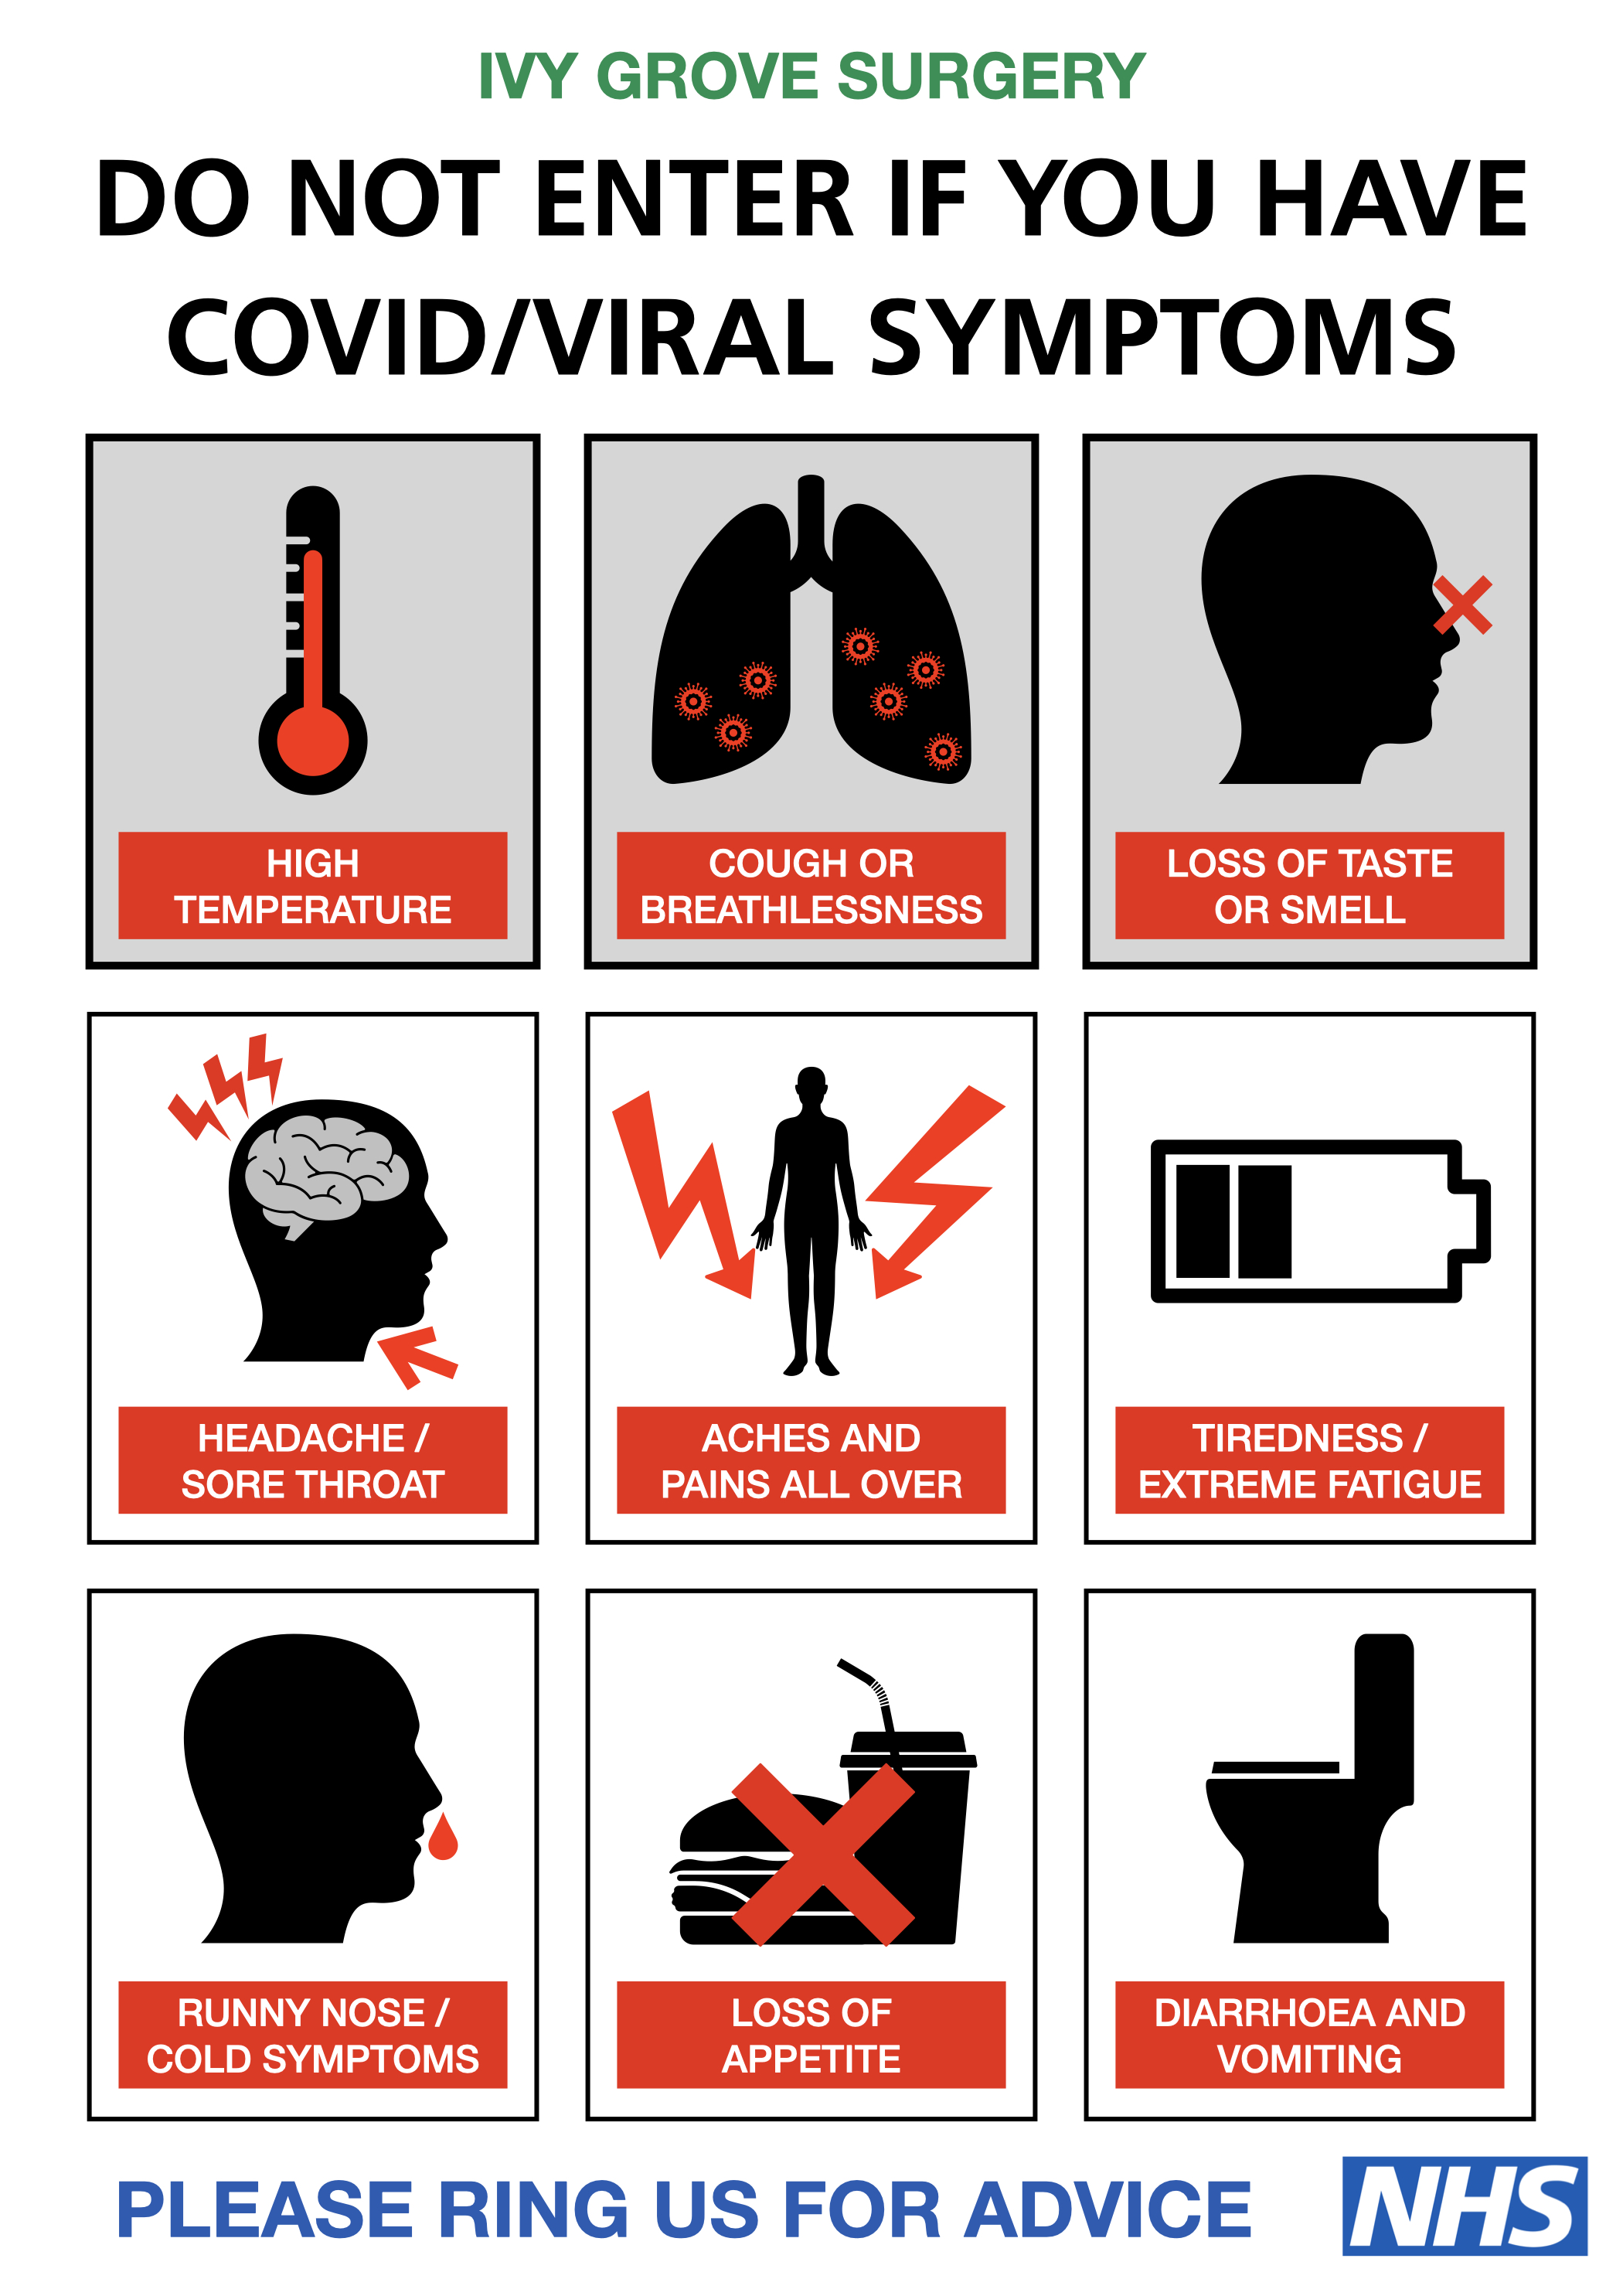 do not enter if covid/viral symptoms